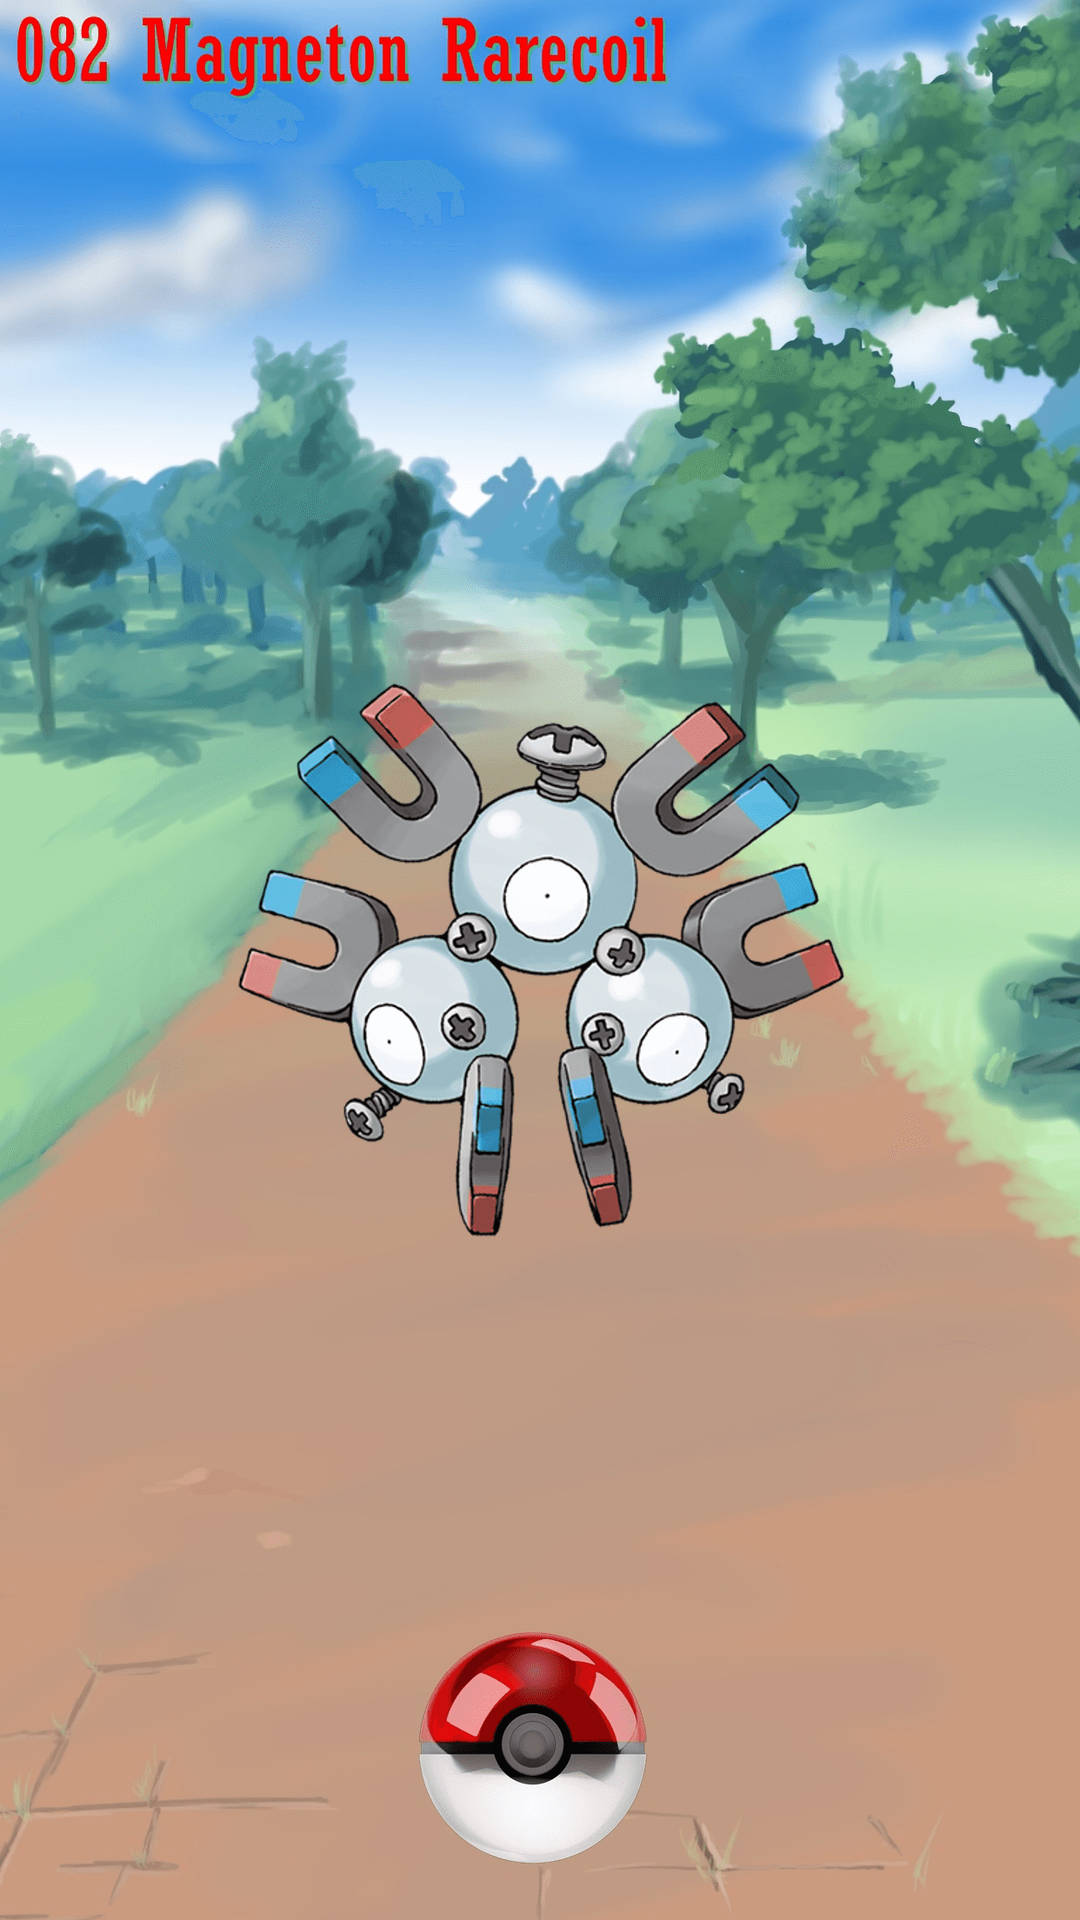 Caption: Encounter with Magneton - A pulsating electric force Wallpaper